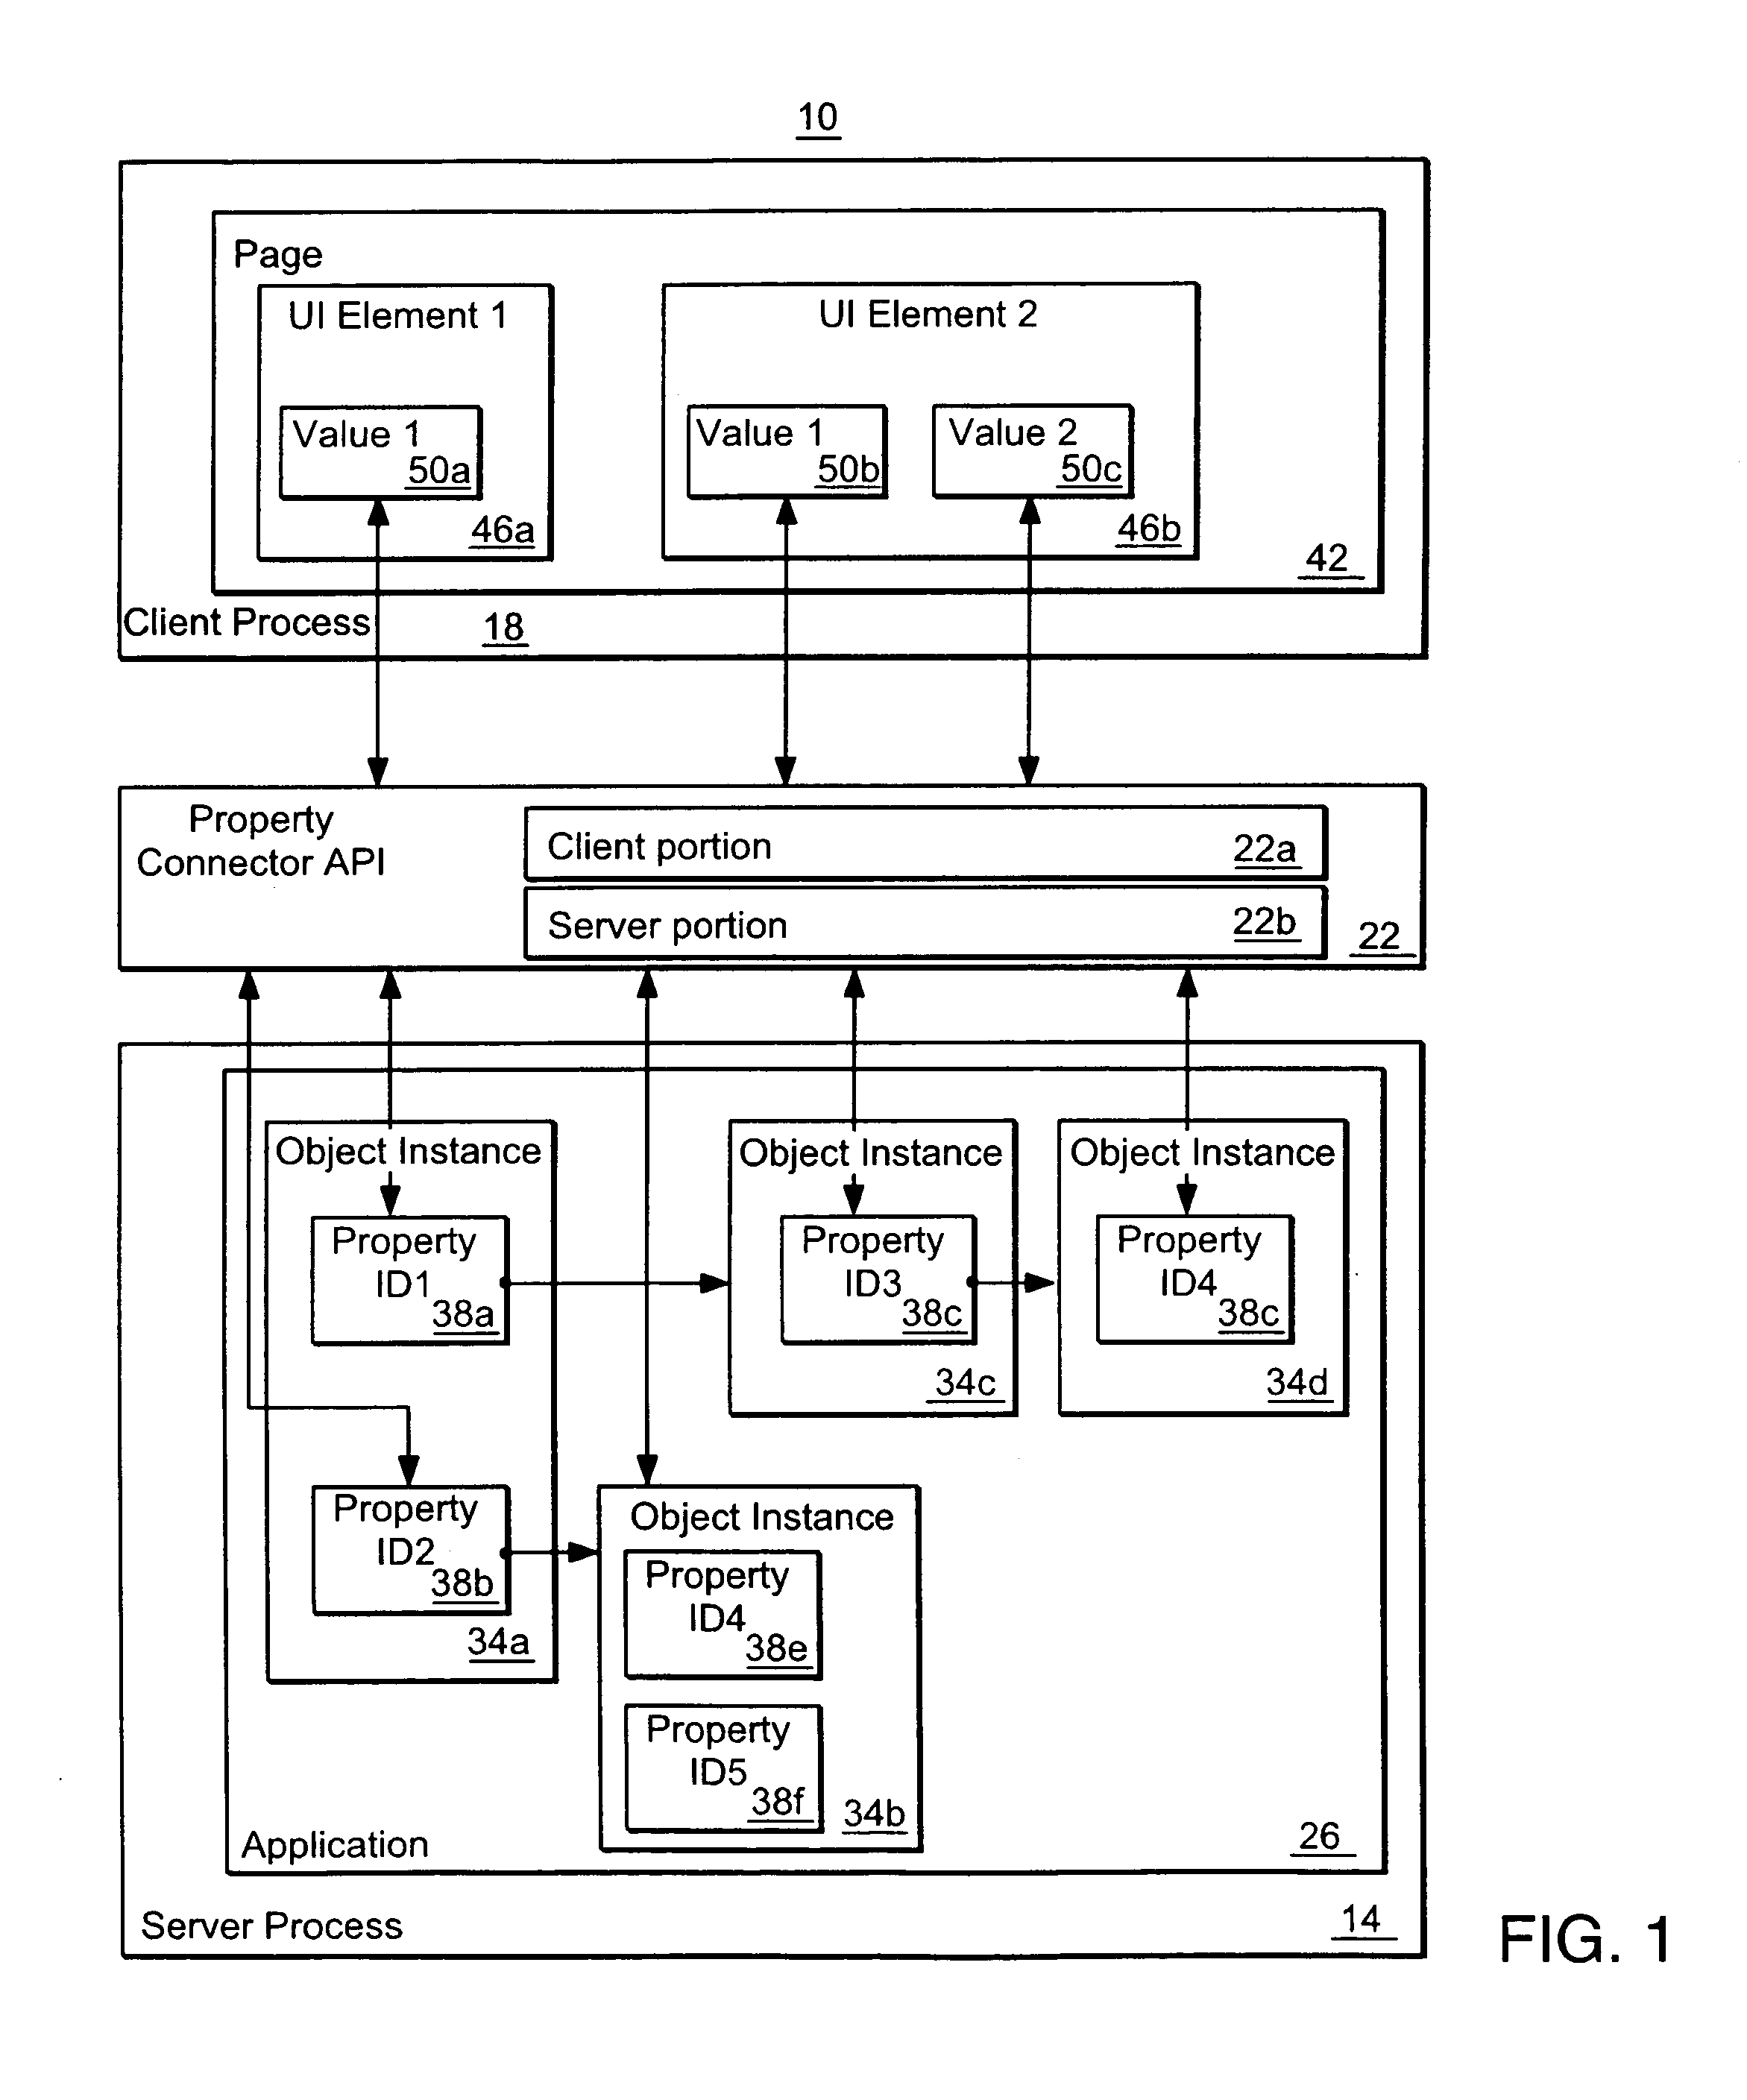 Methods and apparatus for communicating changes between a user interface and an executing application using property paths